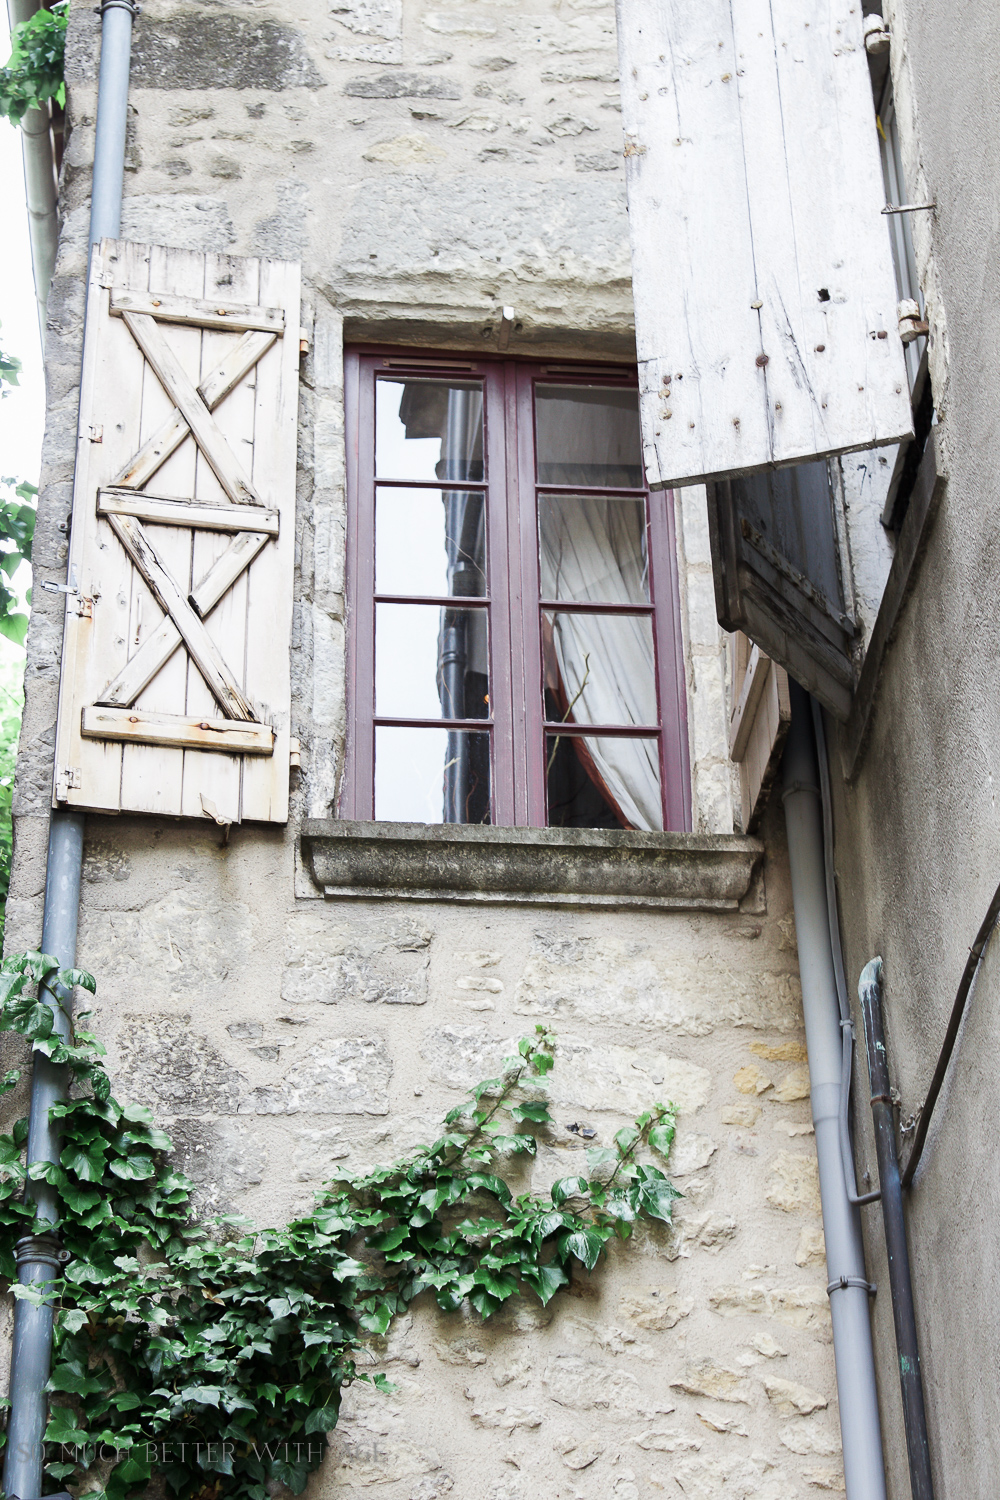 A window with shutters.